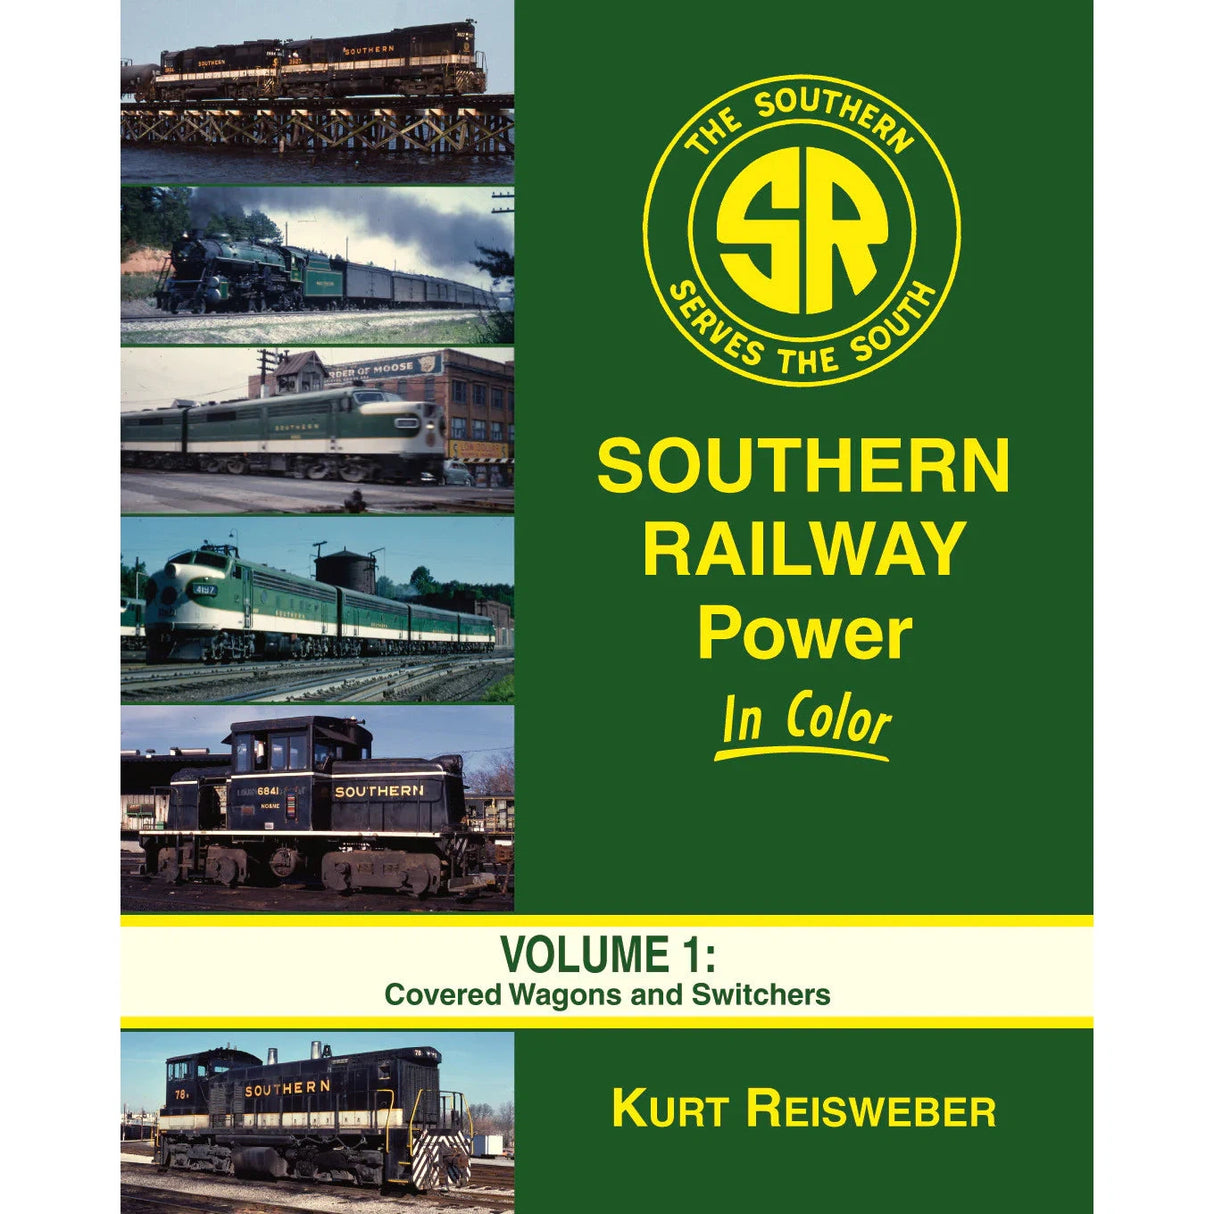 Morning Sun Books MSB1563 Southern Railway Power In Color Volume 1